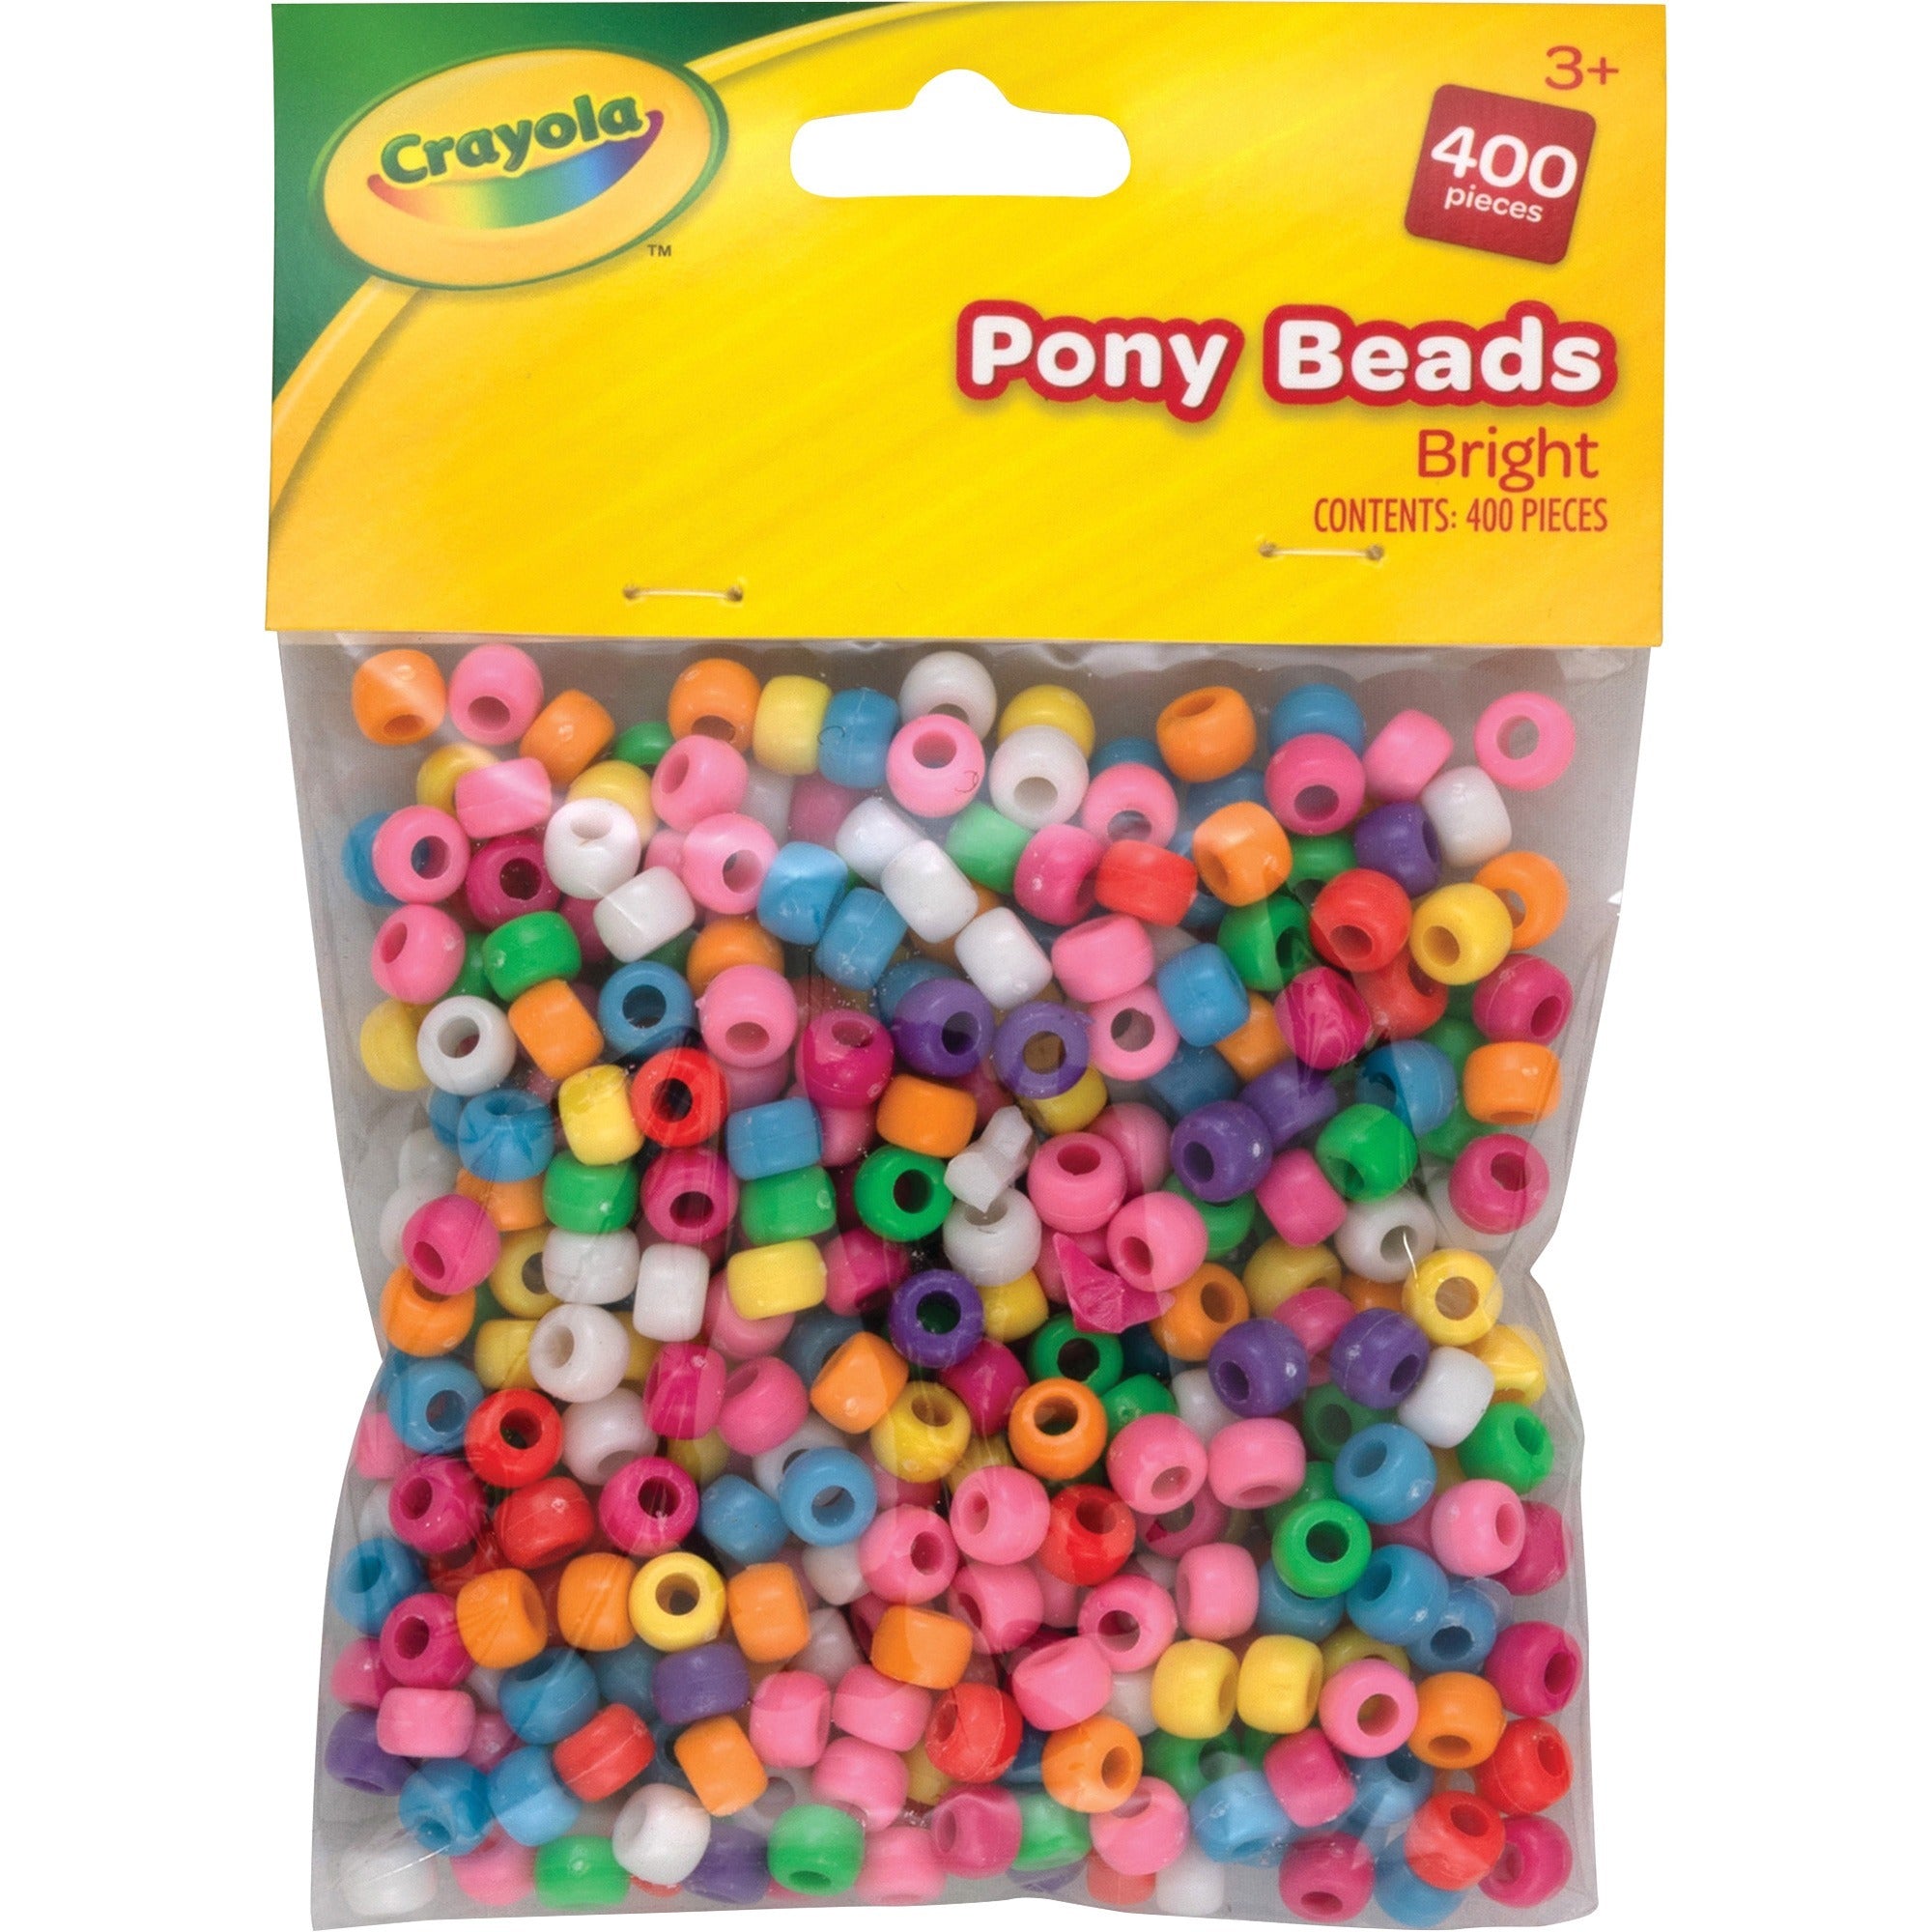 crayola-pony-beads-key-chain-project-party-classroom-necklace-bracelet-400-pieces-400-pack-bright-assorted_pacp355402cra - 1